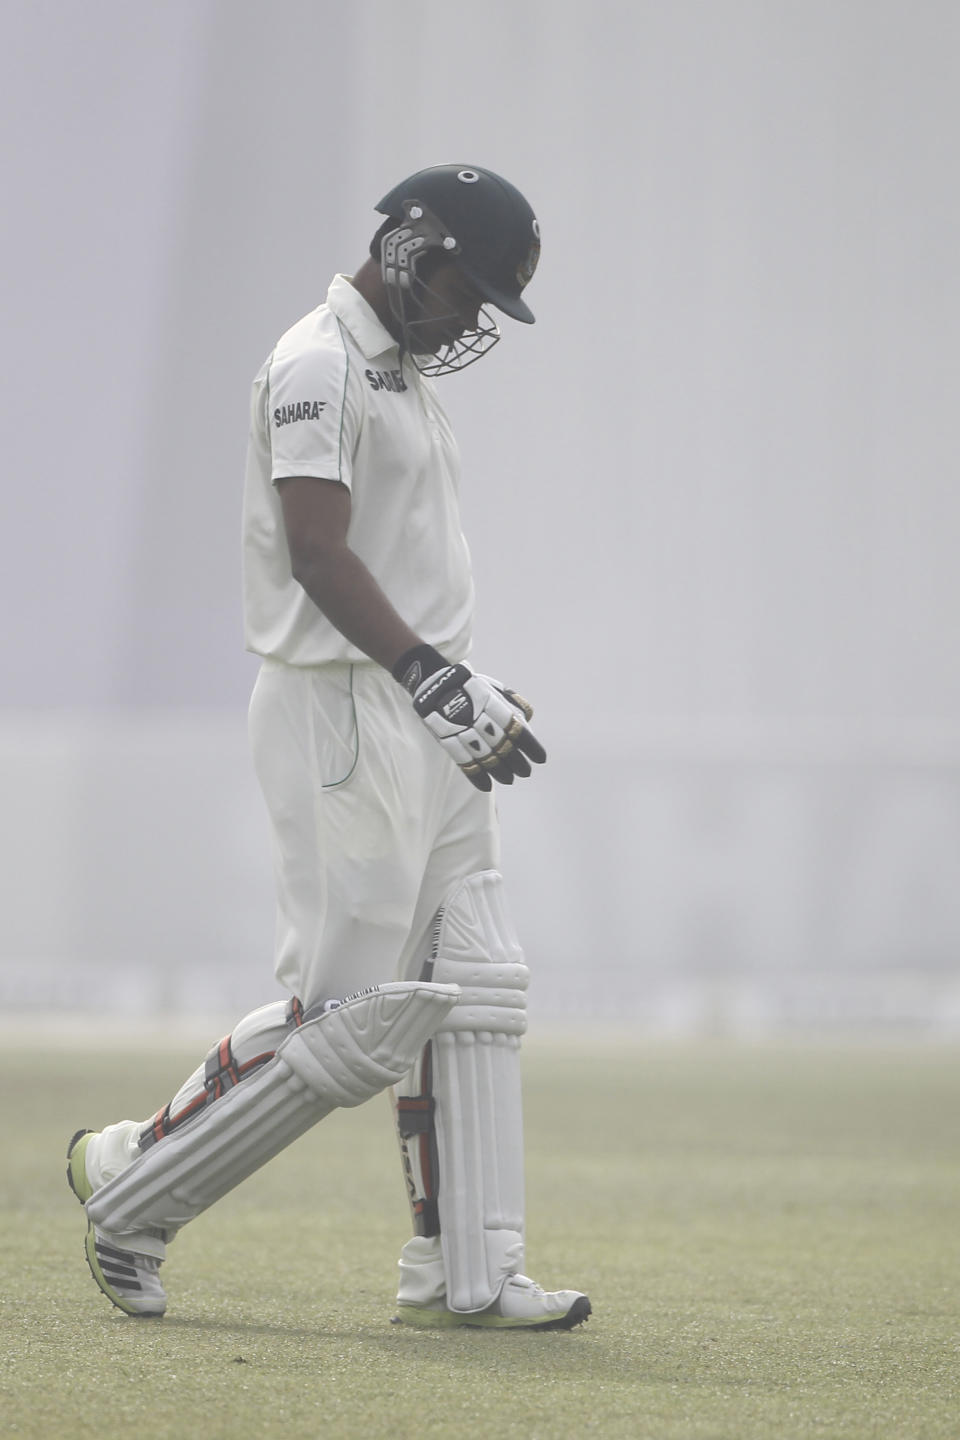 Bangladesh’s Marshall Ayub returns to the pavilion after his dismissal by Sri Lanka’s Suranga Lakmal on the fourth day of their first test cricket match in Dhaka, Bangladesh, Thursday, Jan. 30, 2014. (AP Photo/A.M. Ahad)